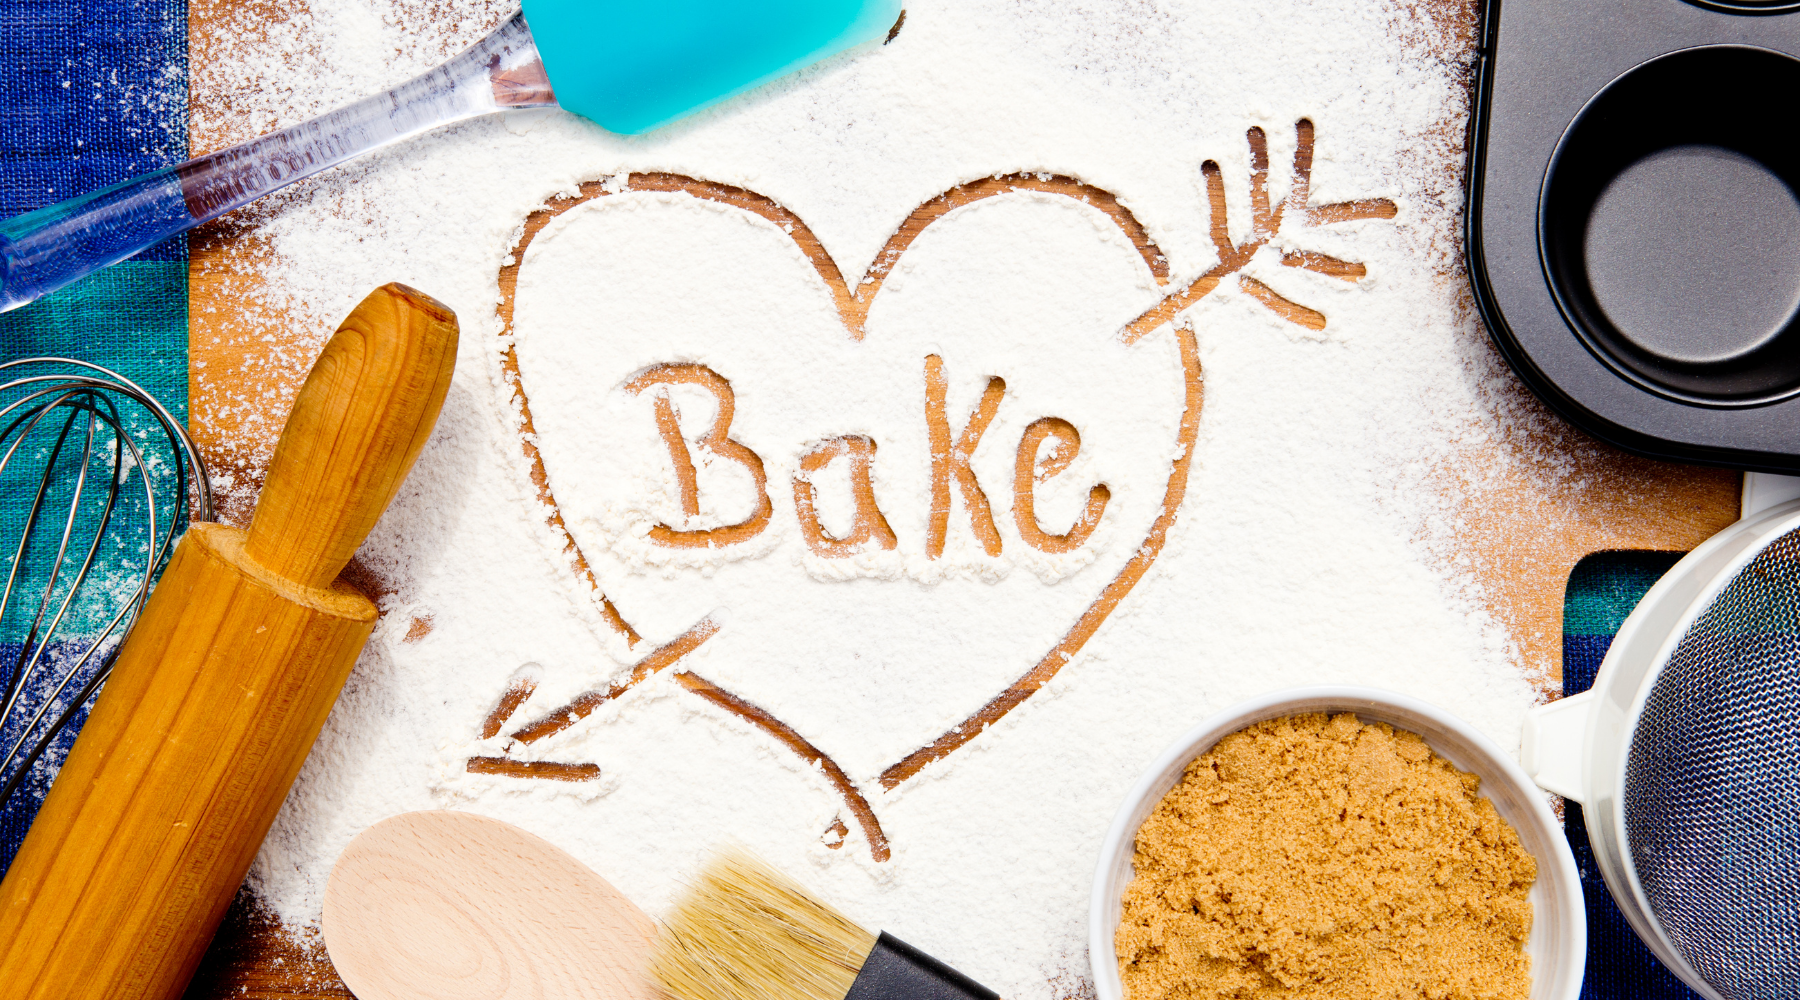 HOW TO USE BUTTER, MILK, AND EGG SUBSTITUTES FOR VEGAN BAKING